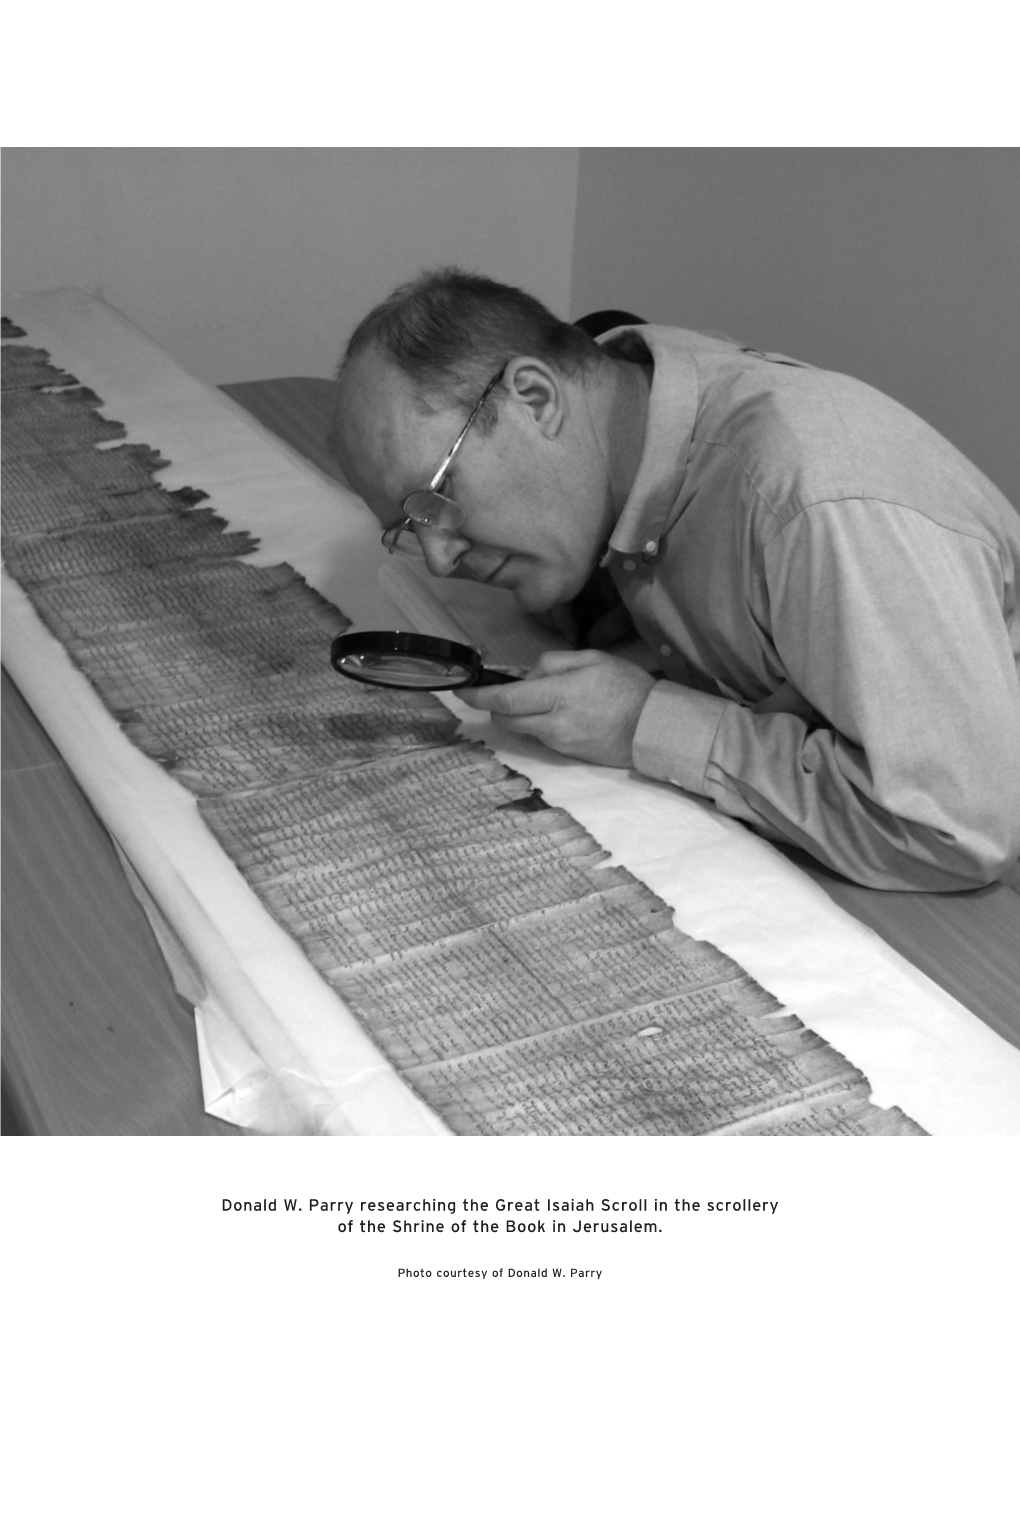 Donald W. Parry Researching the Great Isaiah Scroll in the Scrollery of the Shrine of the Book in Jerusalem